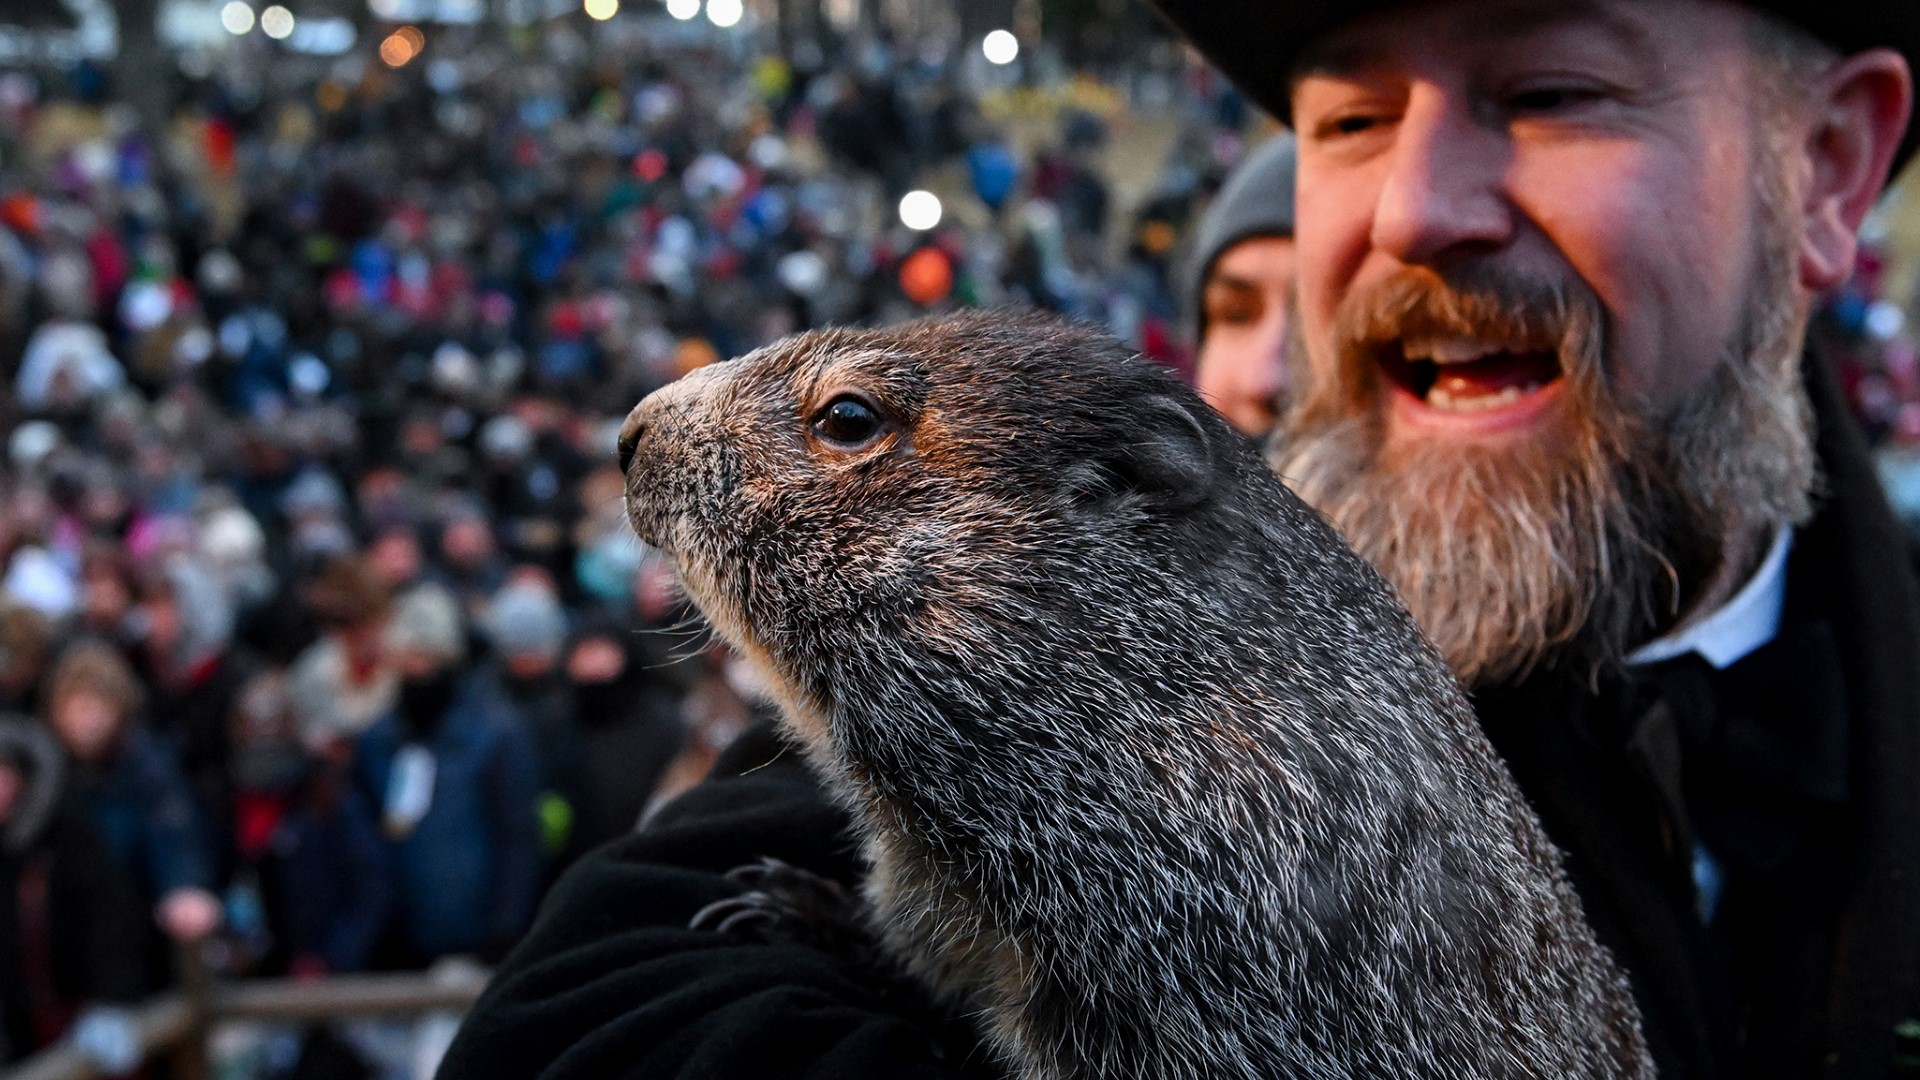 Punxsutawney Phil emerged from his home Thursday morning, and let the world know they can expect six more weeks of winter!